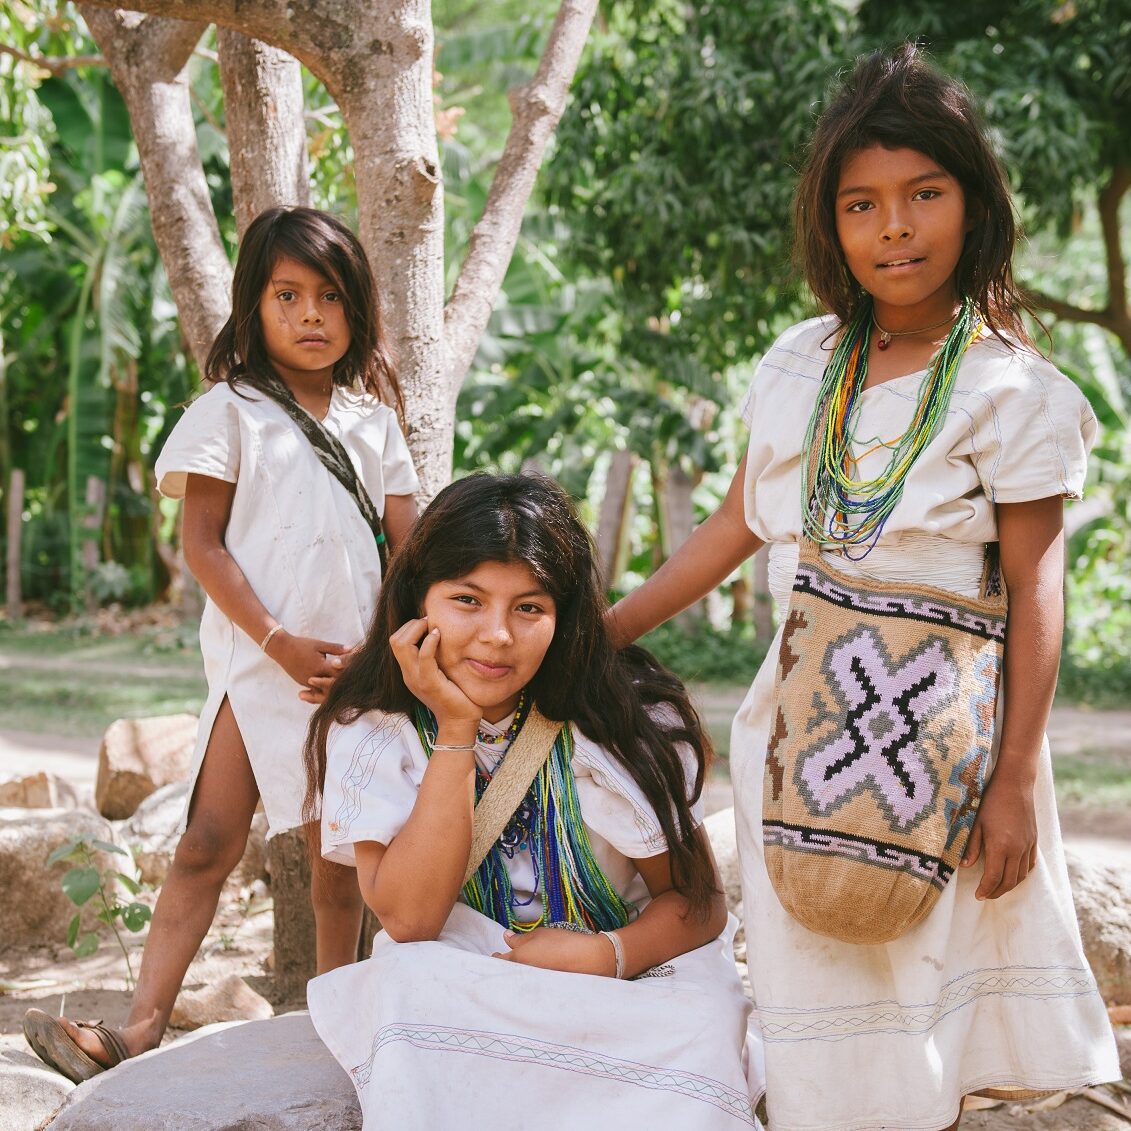 Three Arhuaco children pose for a photo among the trees